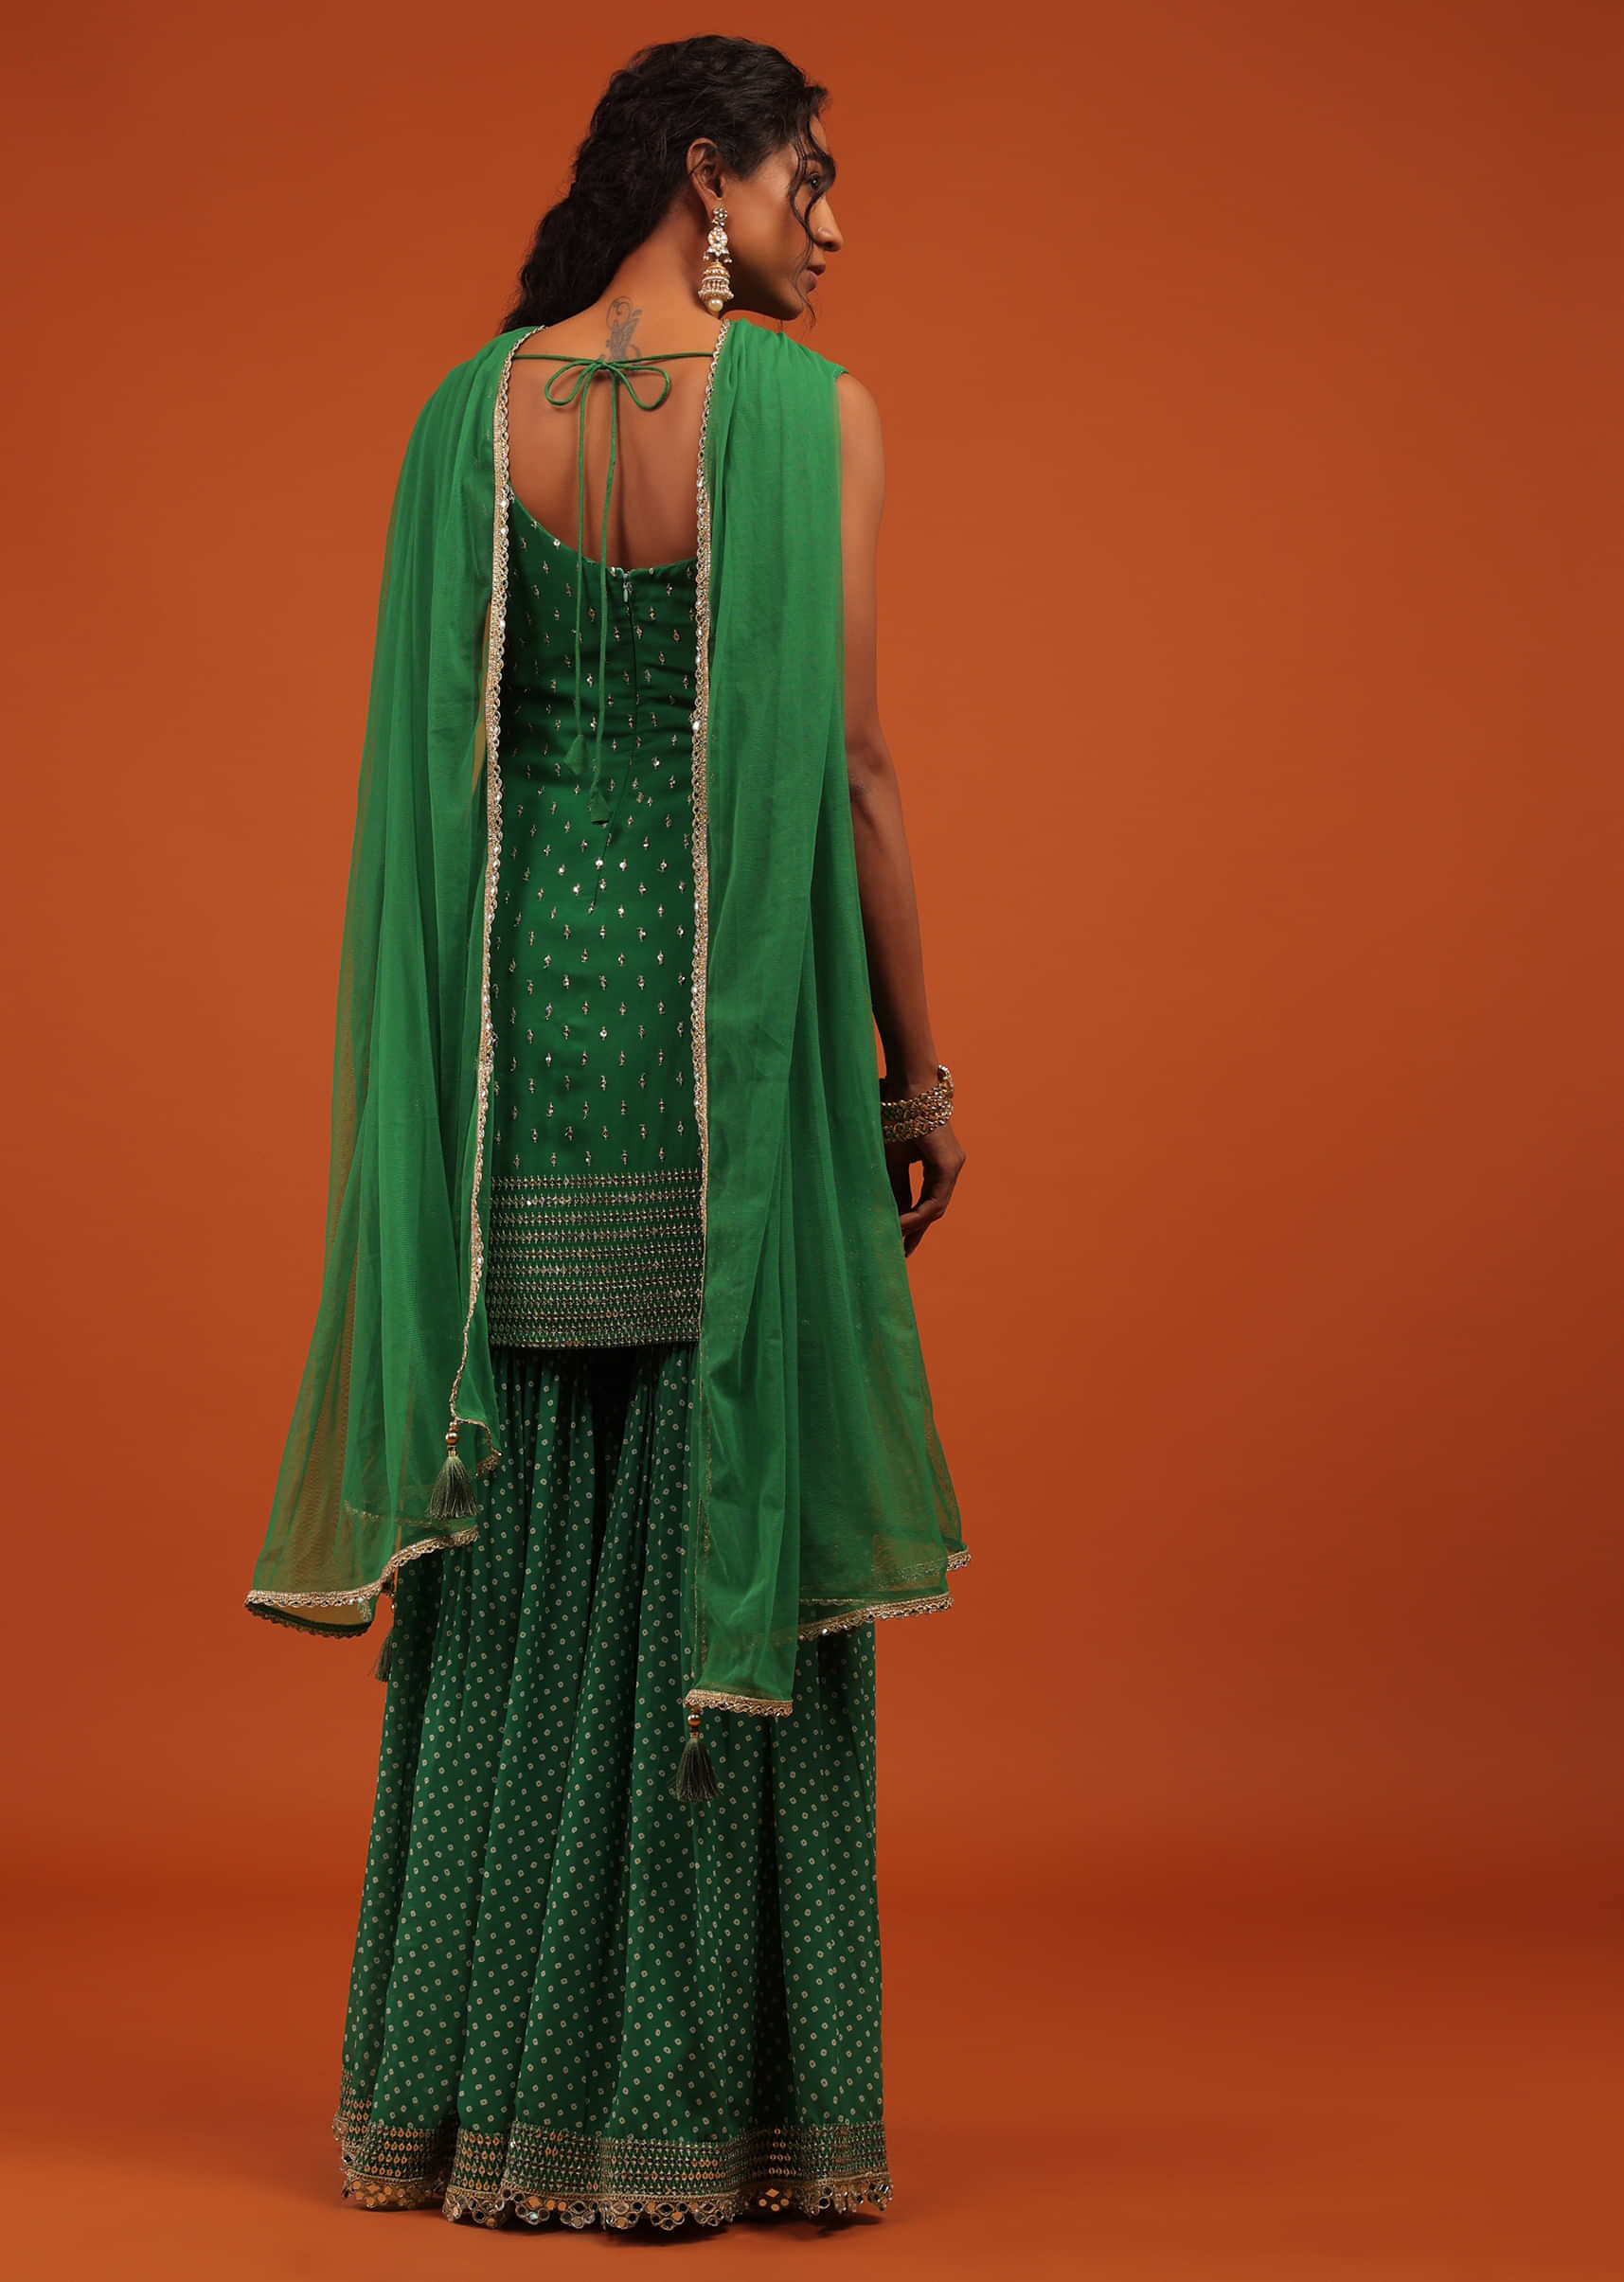 Green Sharara Suit In Georgette With A Net Dupatta